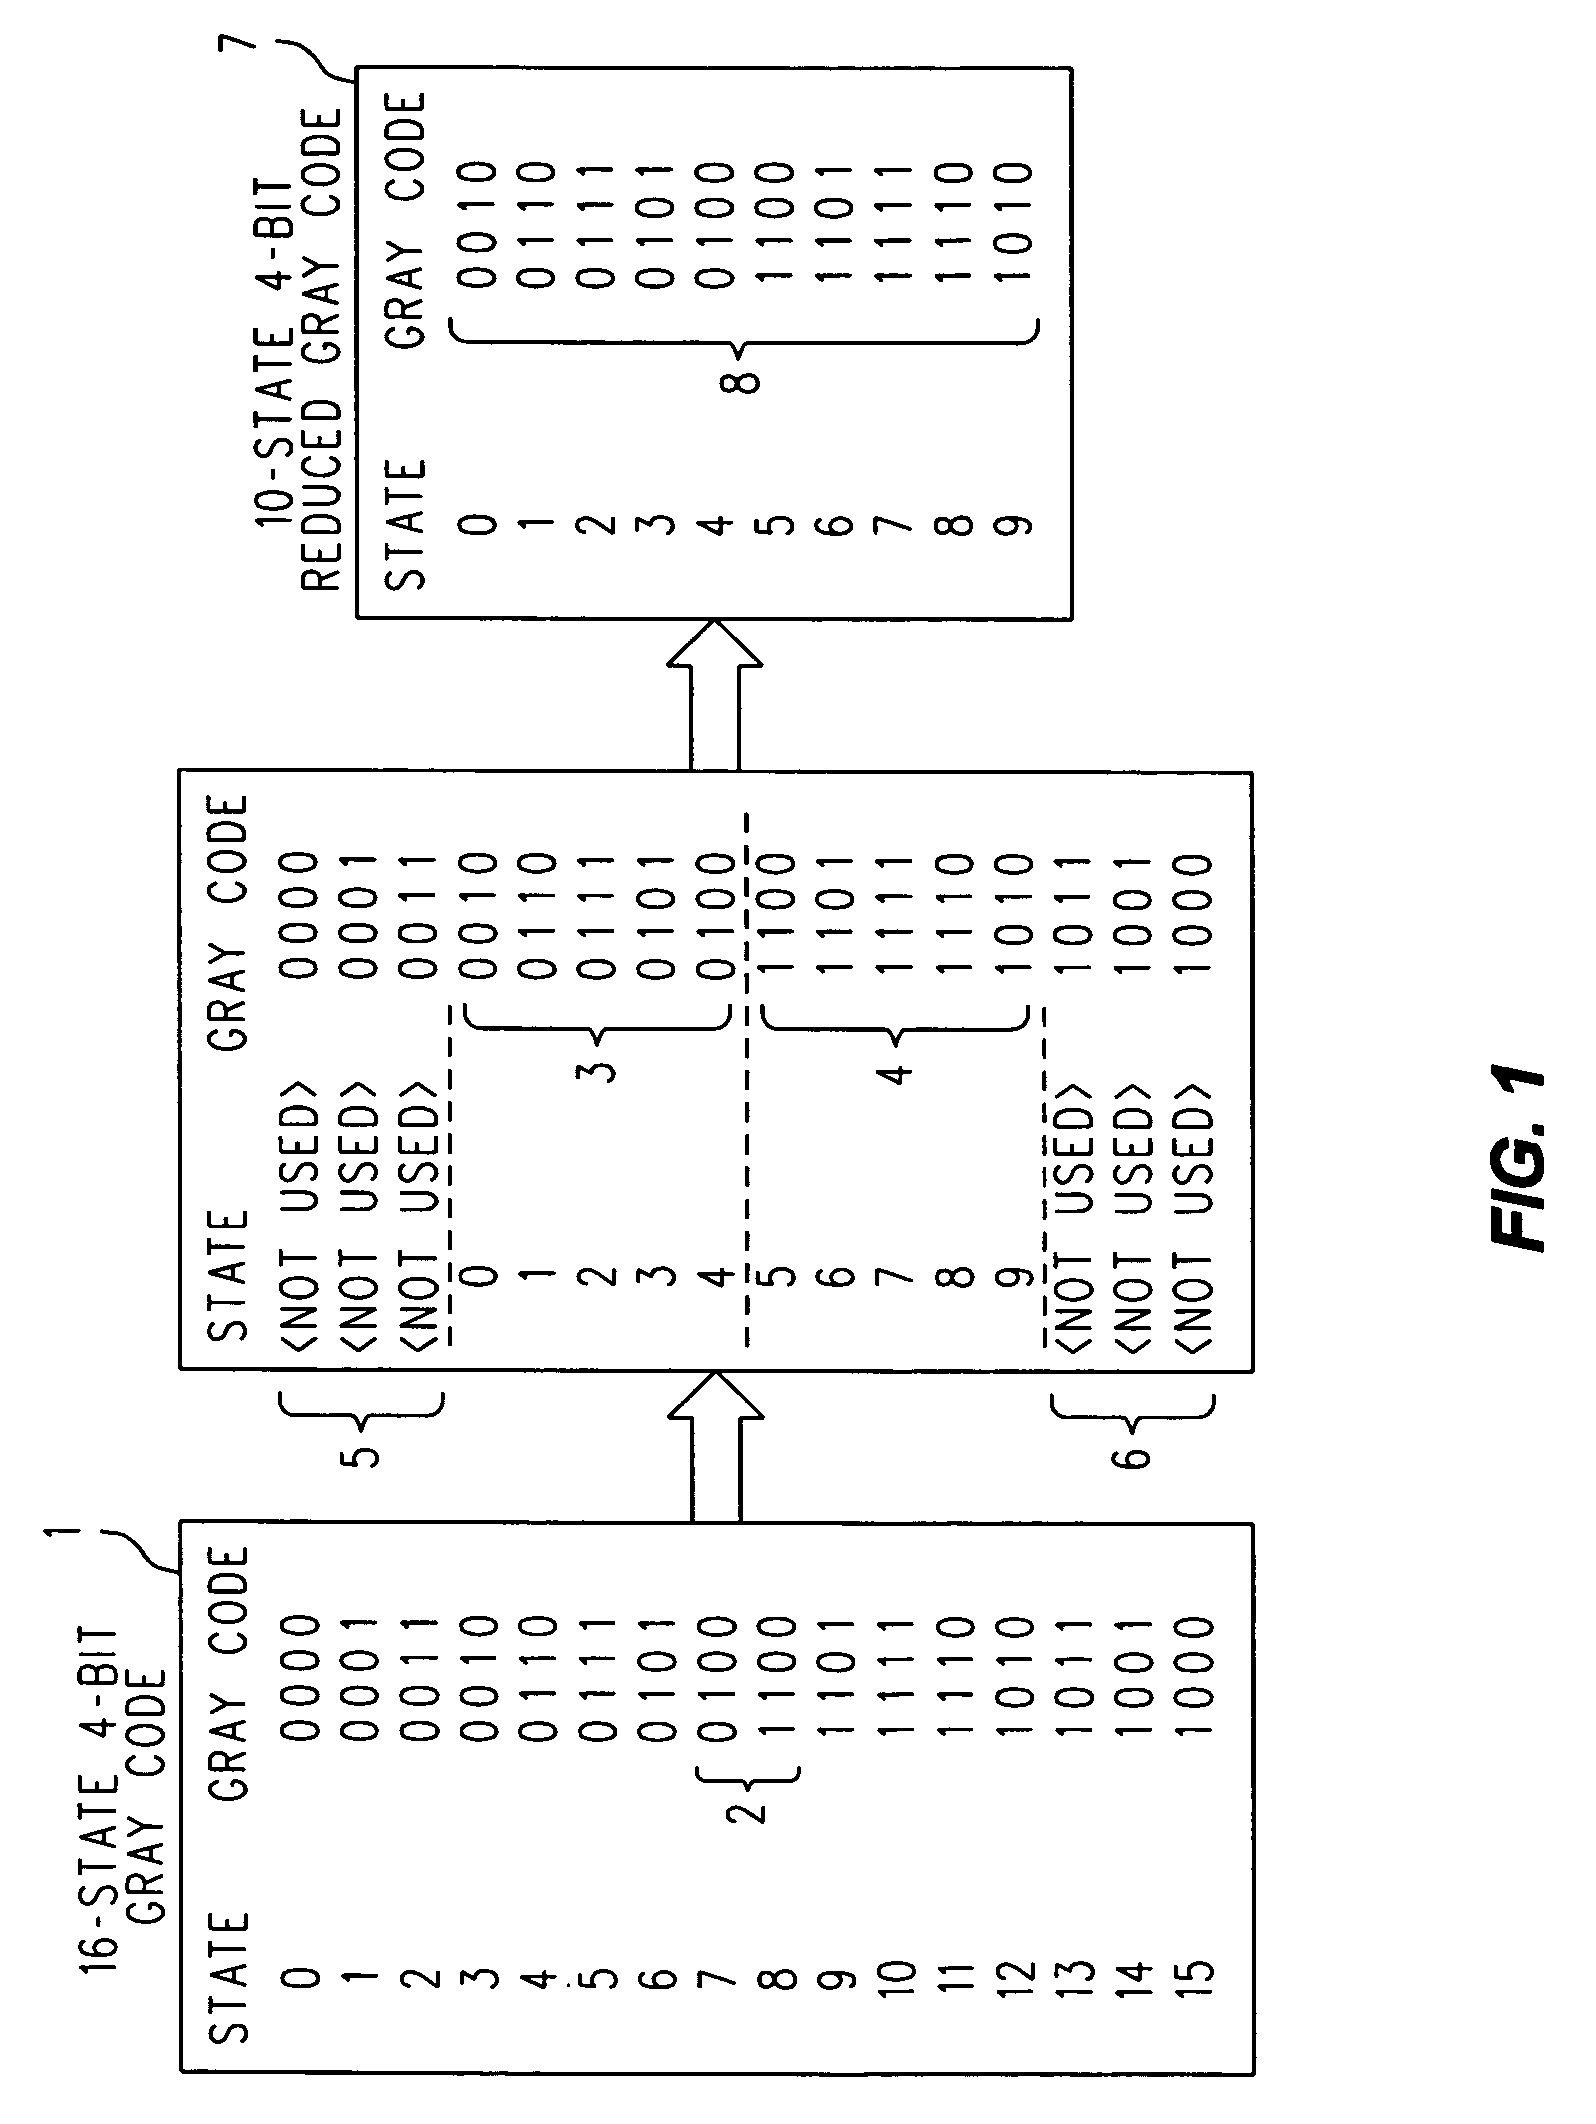 Method for generation of even numbered reduced gray codes